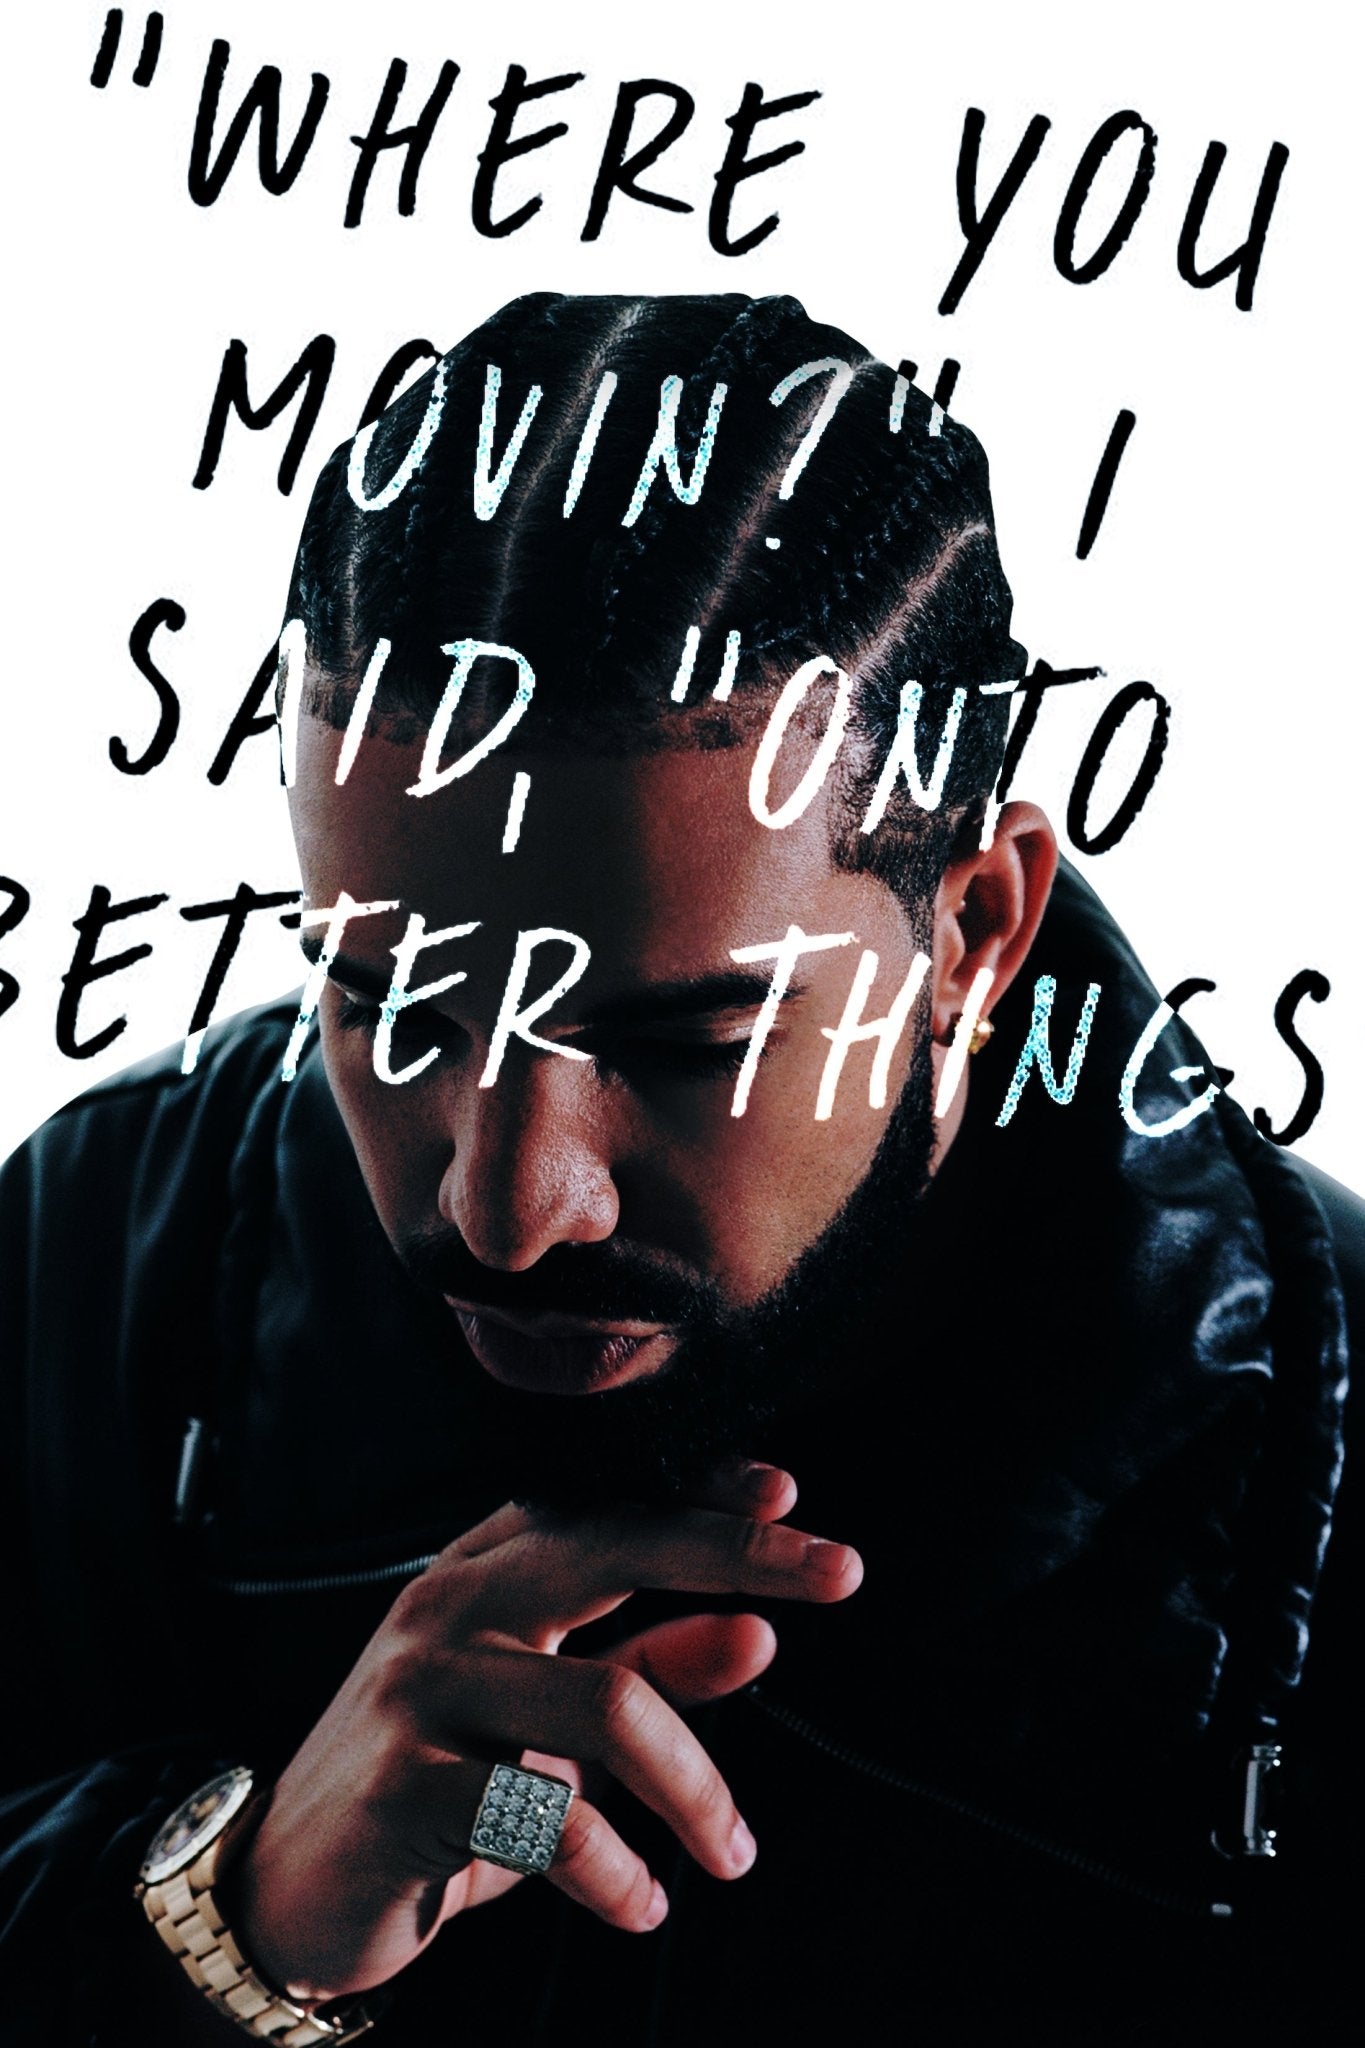 Drake 'Onto Better Things' Poster - Posters Plug